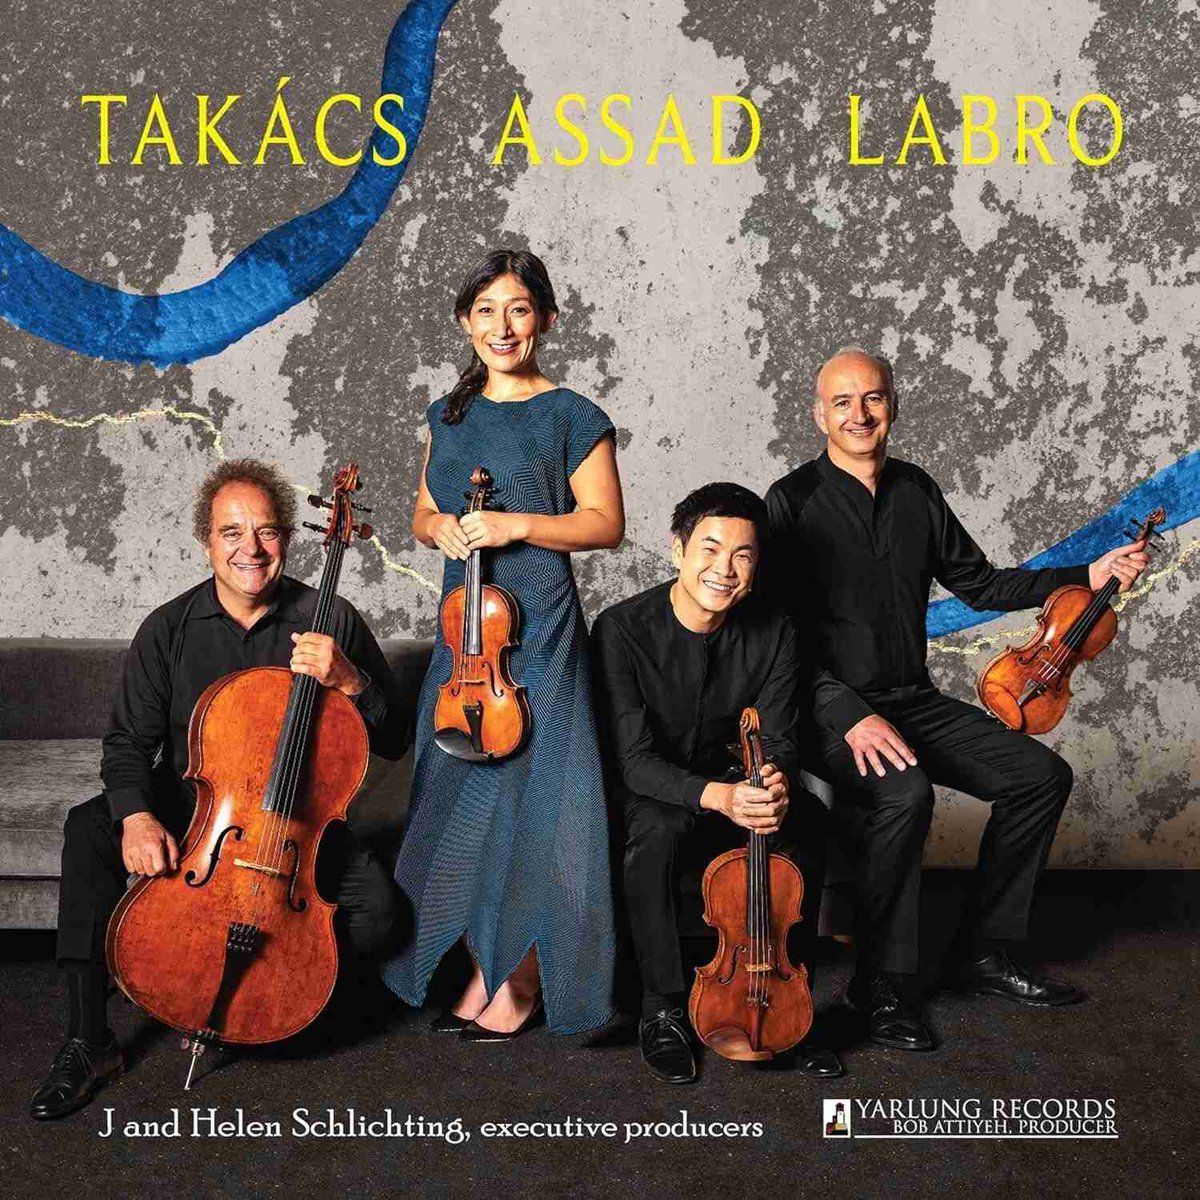 #CDReview Through their work with the Hungaraton, Decca and Hyperion labels the Takács Quartet are very much associated with the core repertoire, so this release featuring five contemporary composers, bandoneón (a classicalsource.com/cd/takacs-assa…